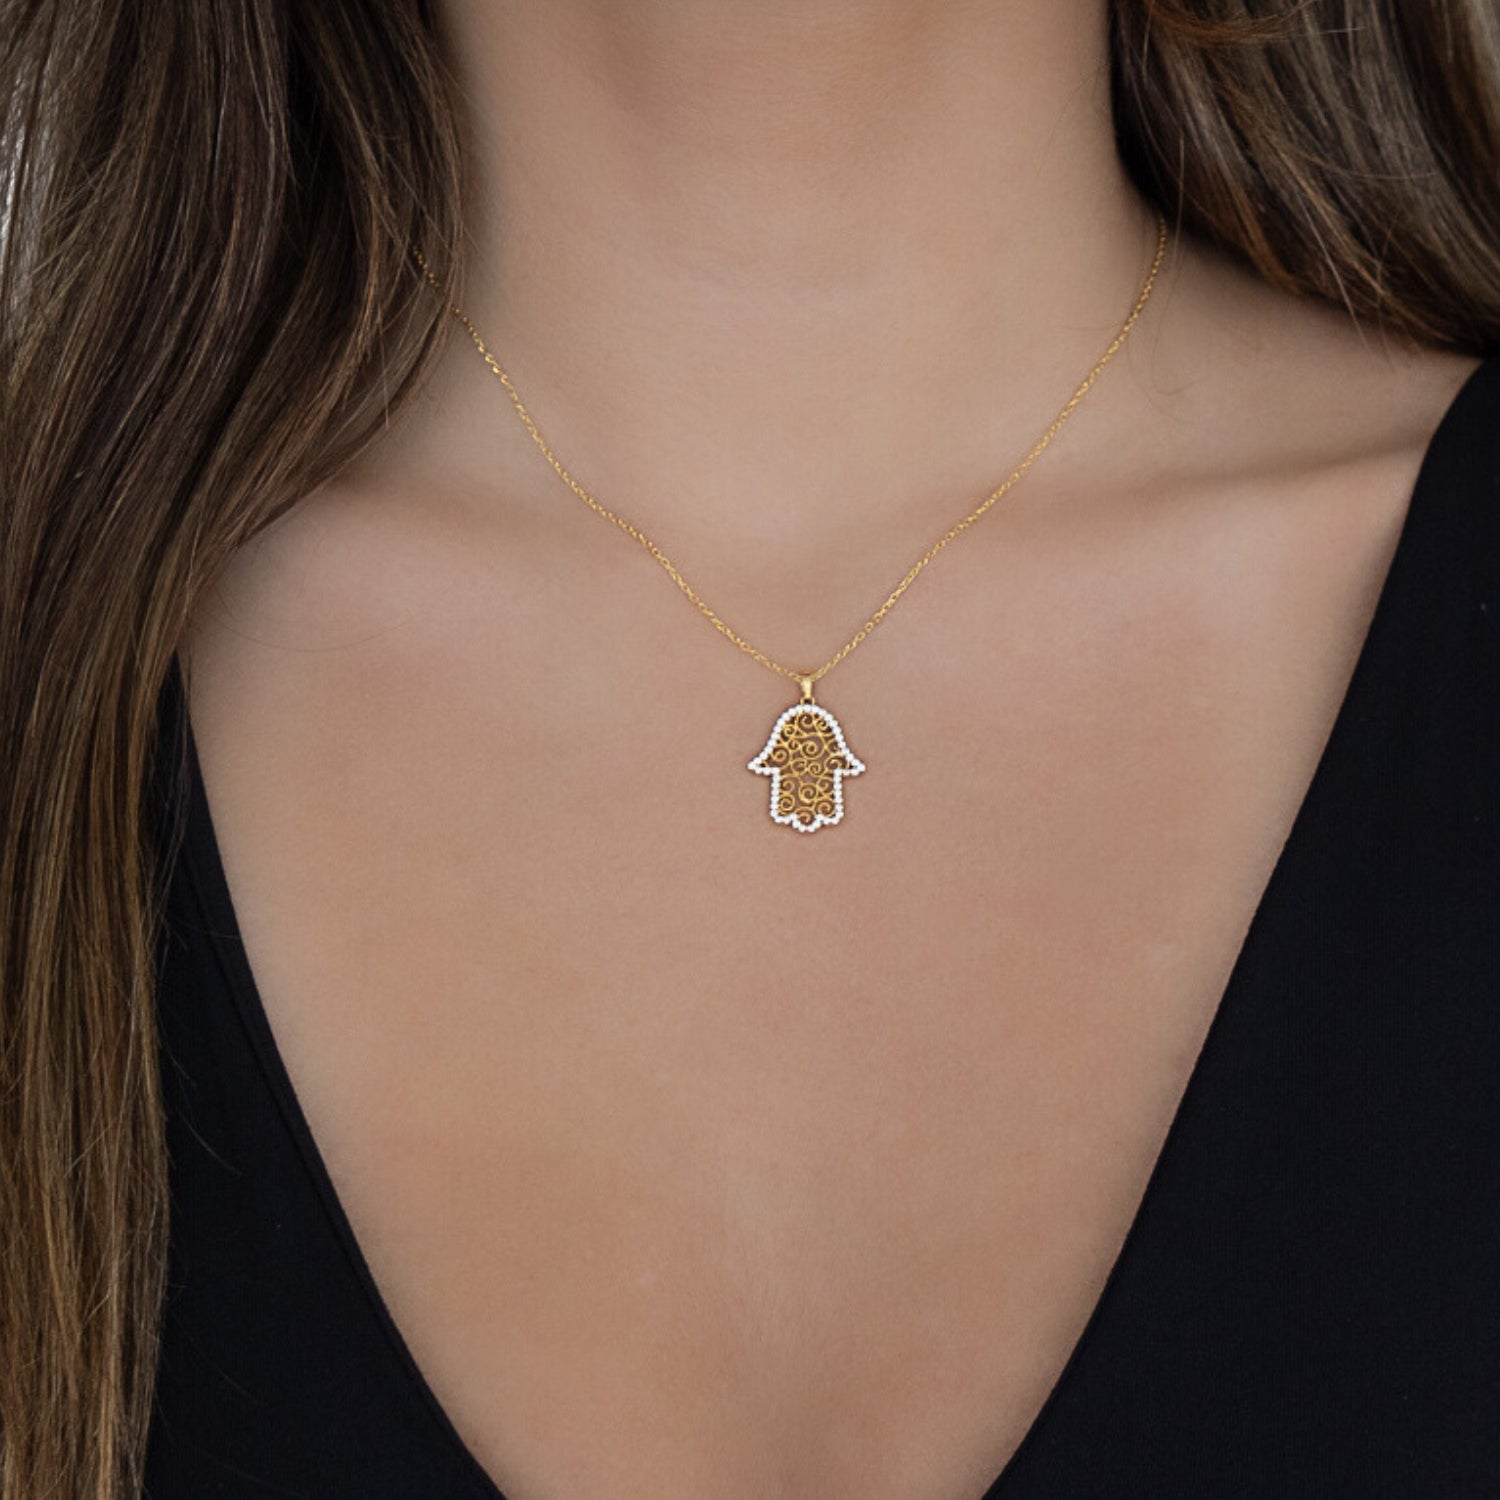 Model wearing the Gold Spiral Hamsa Necklace, showcasing the elegance and meaning behind the Hamsa pendant and the sparkle of the CZ diamonds.